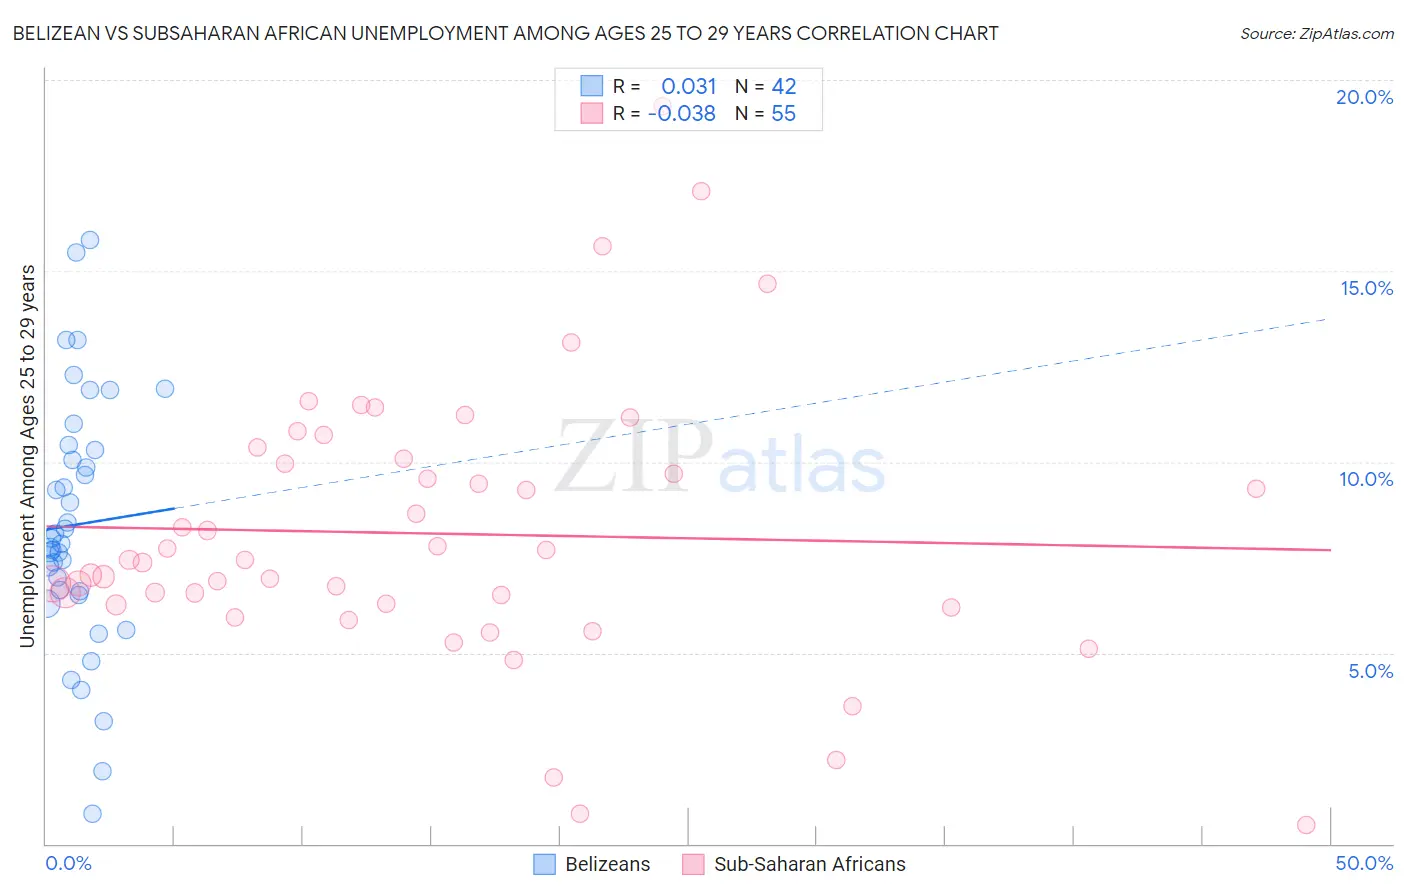 Belizean vs Subsaharan African Unemployment Among Ages 25 to 29 years